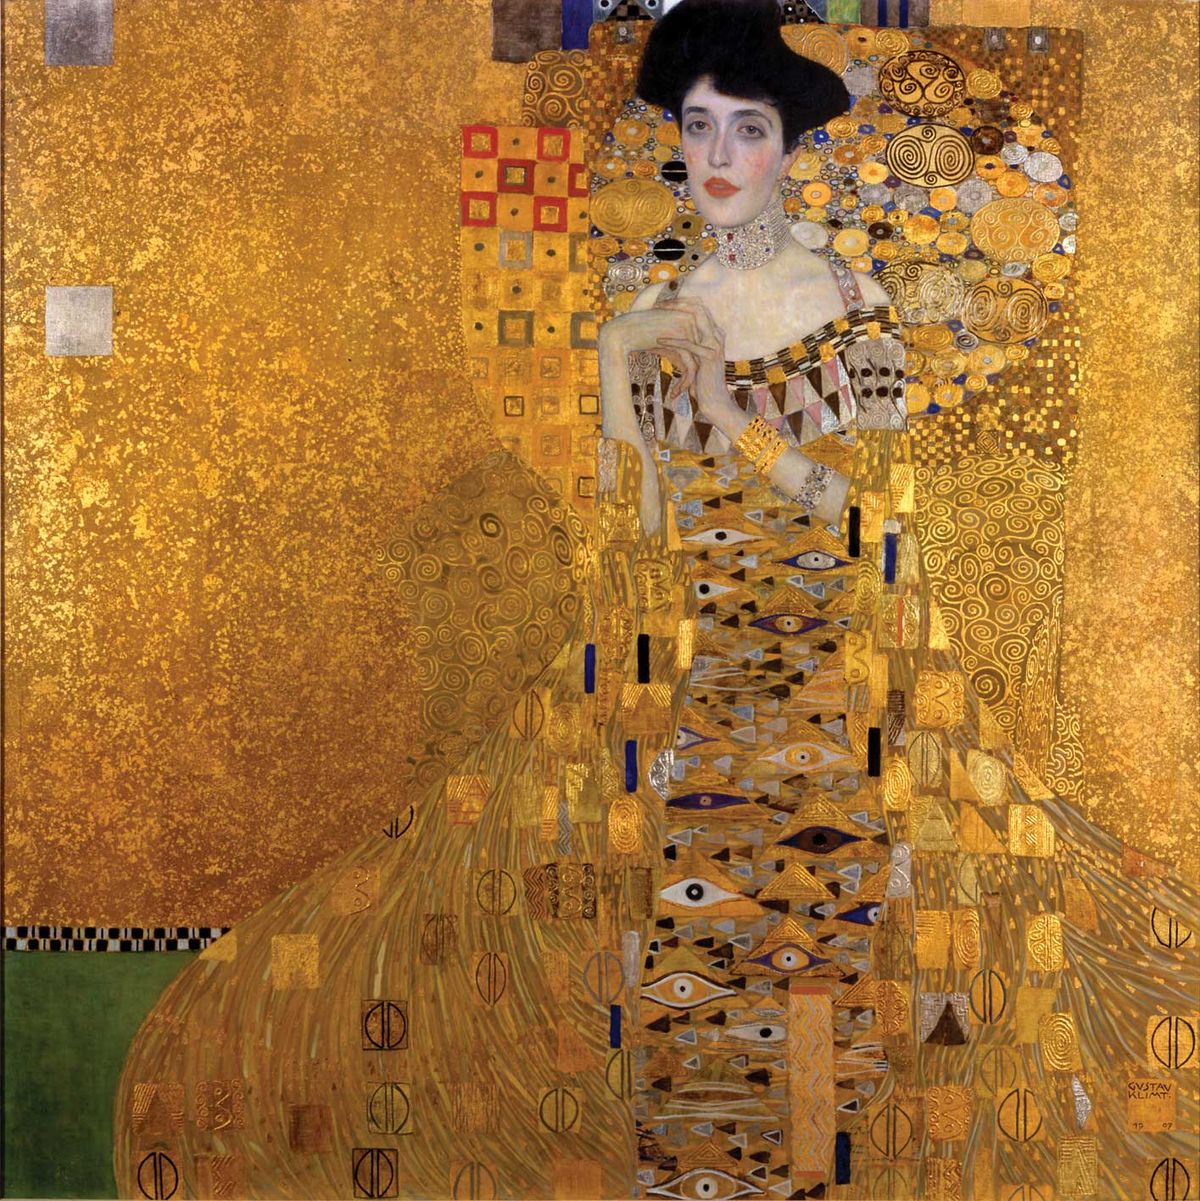 Maria Altmann is seeking six works by Gustav Klimt looted by the Nazis, including Portrait of Adele Bloch-Bauer I (1907) Photo: Neue Galerie New York